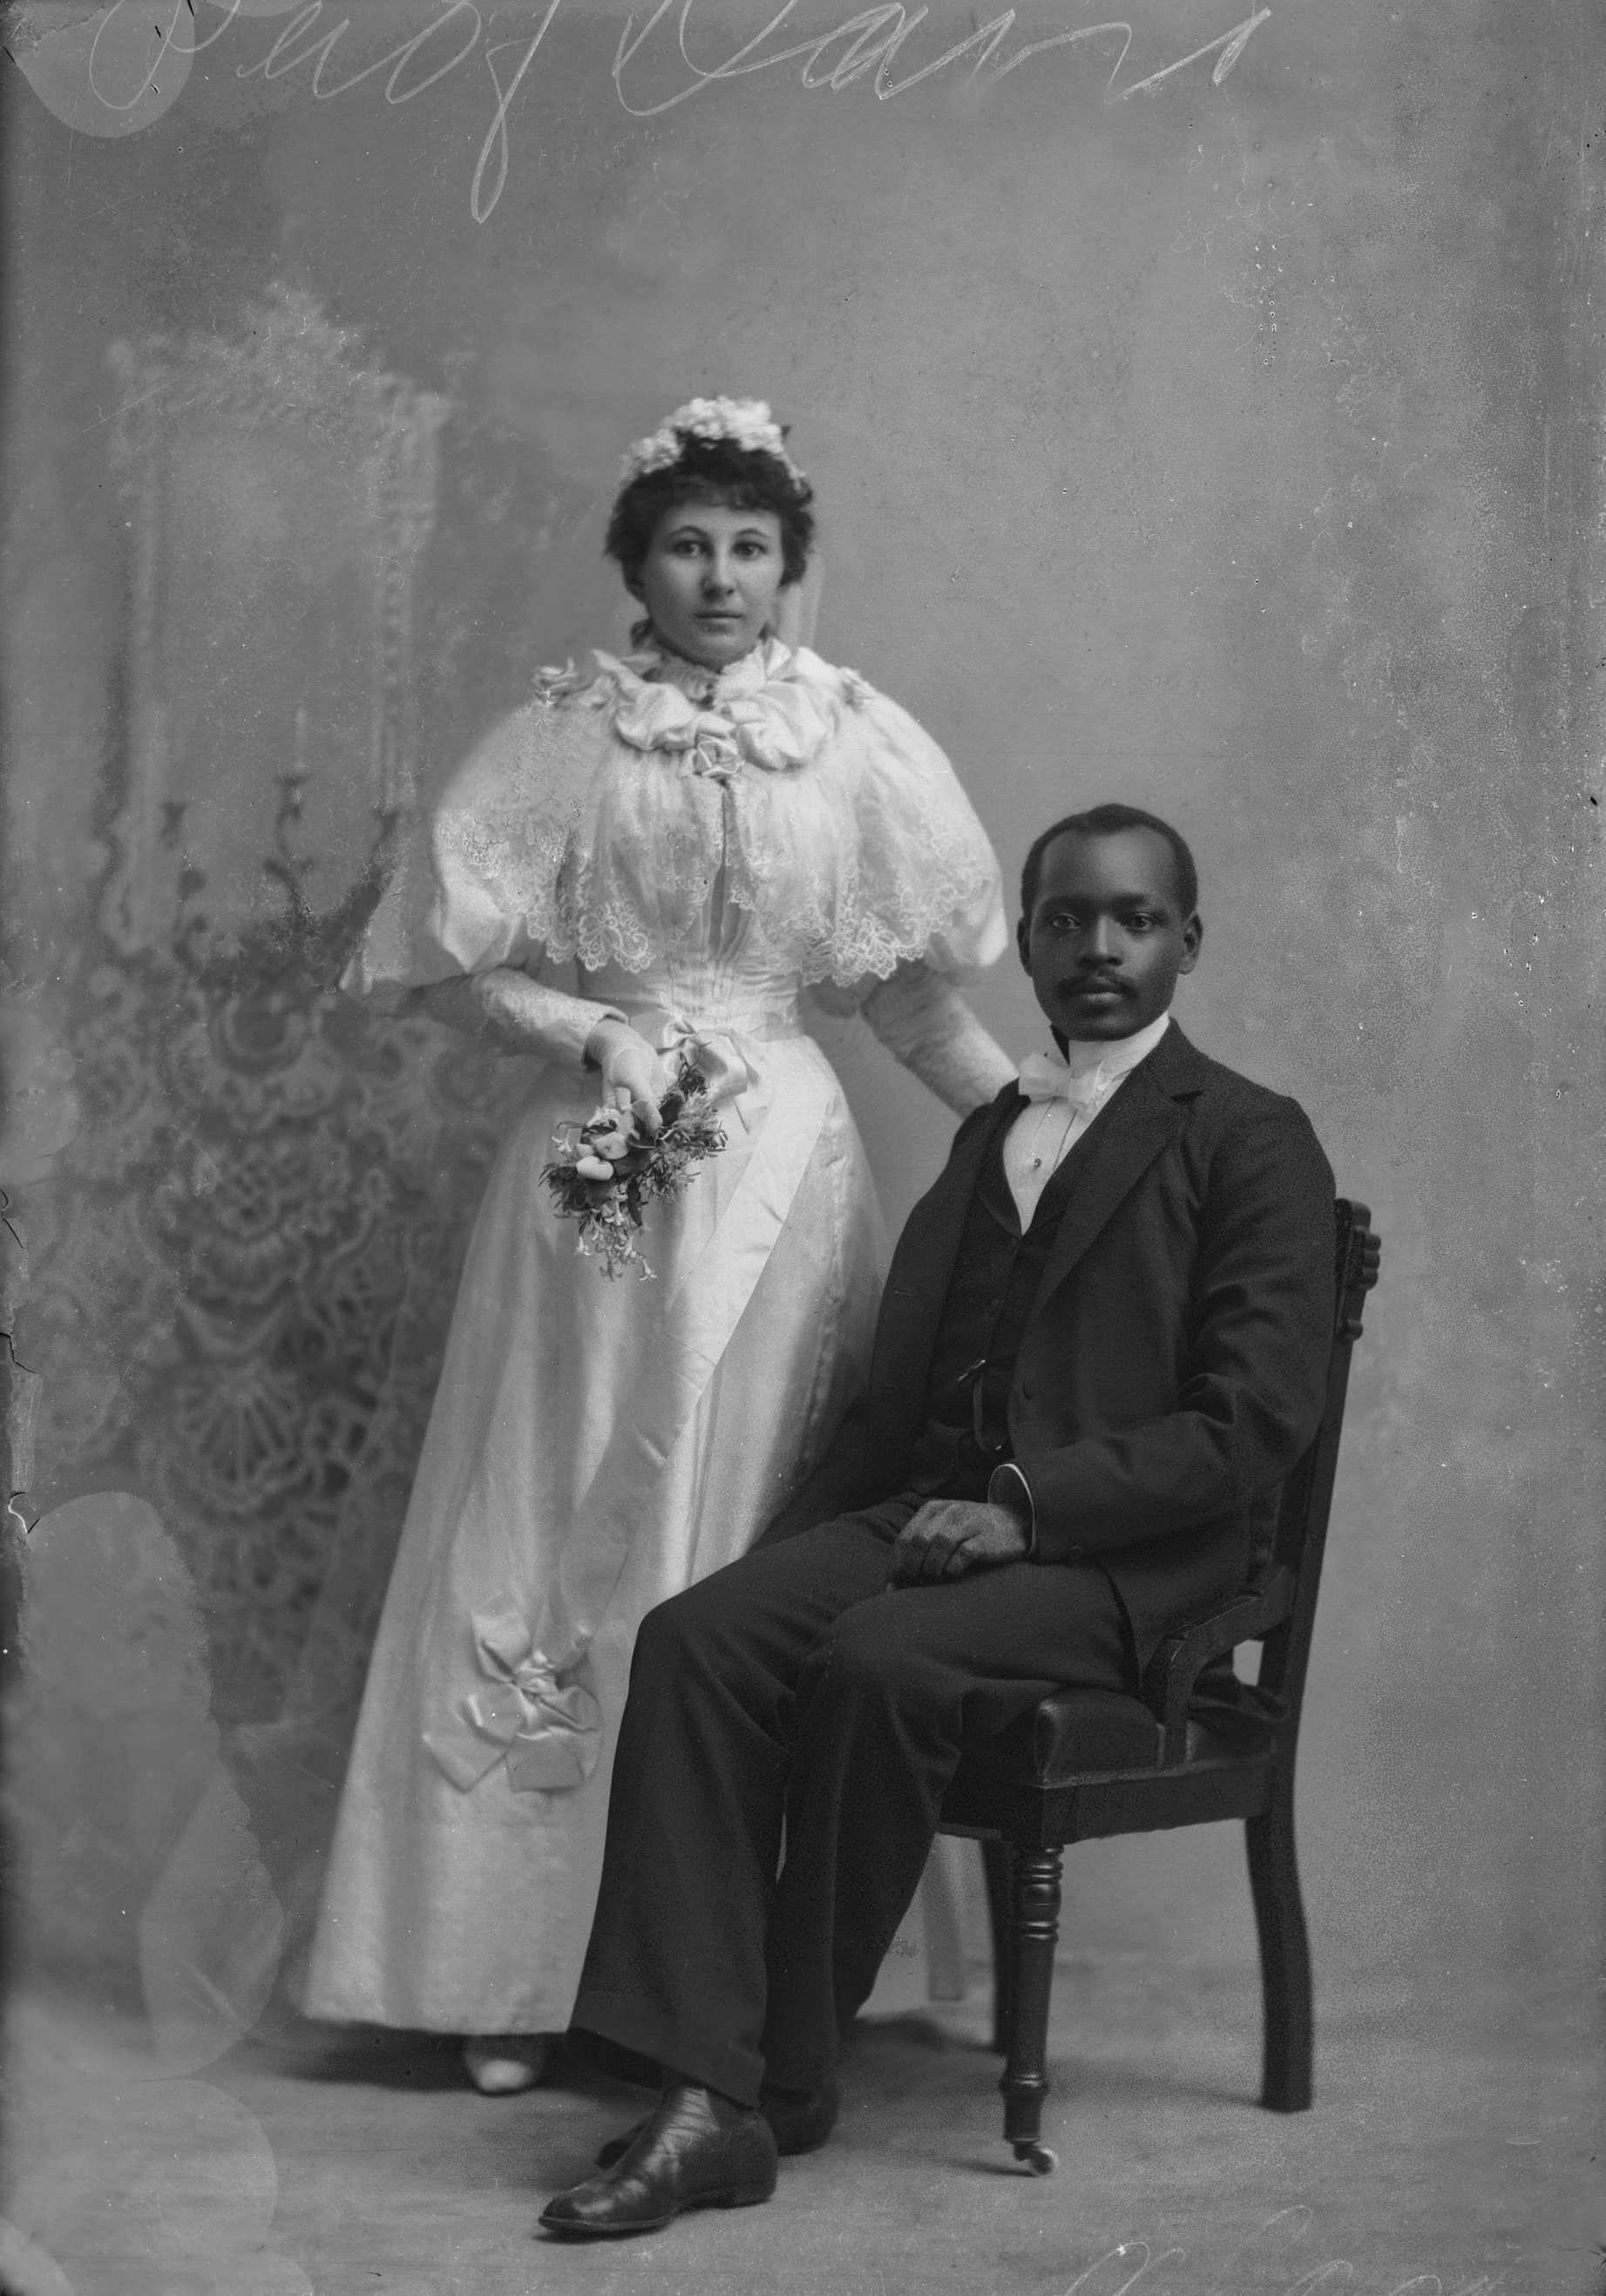 A worn black and white studio portrait of a bride and her groom. He is sitting in a chair when she stands.